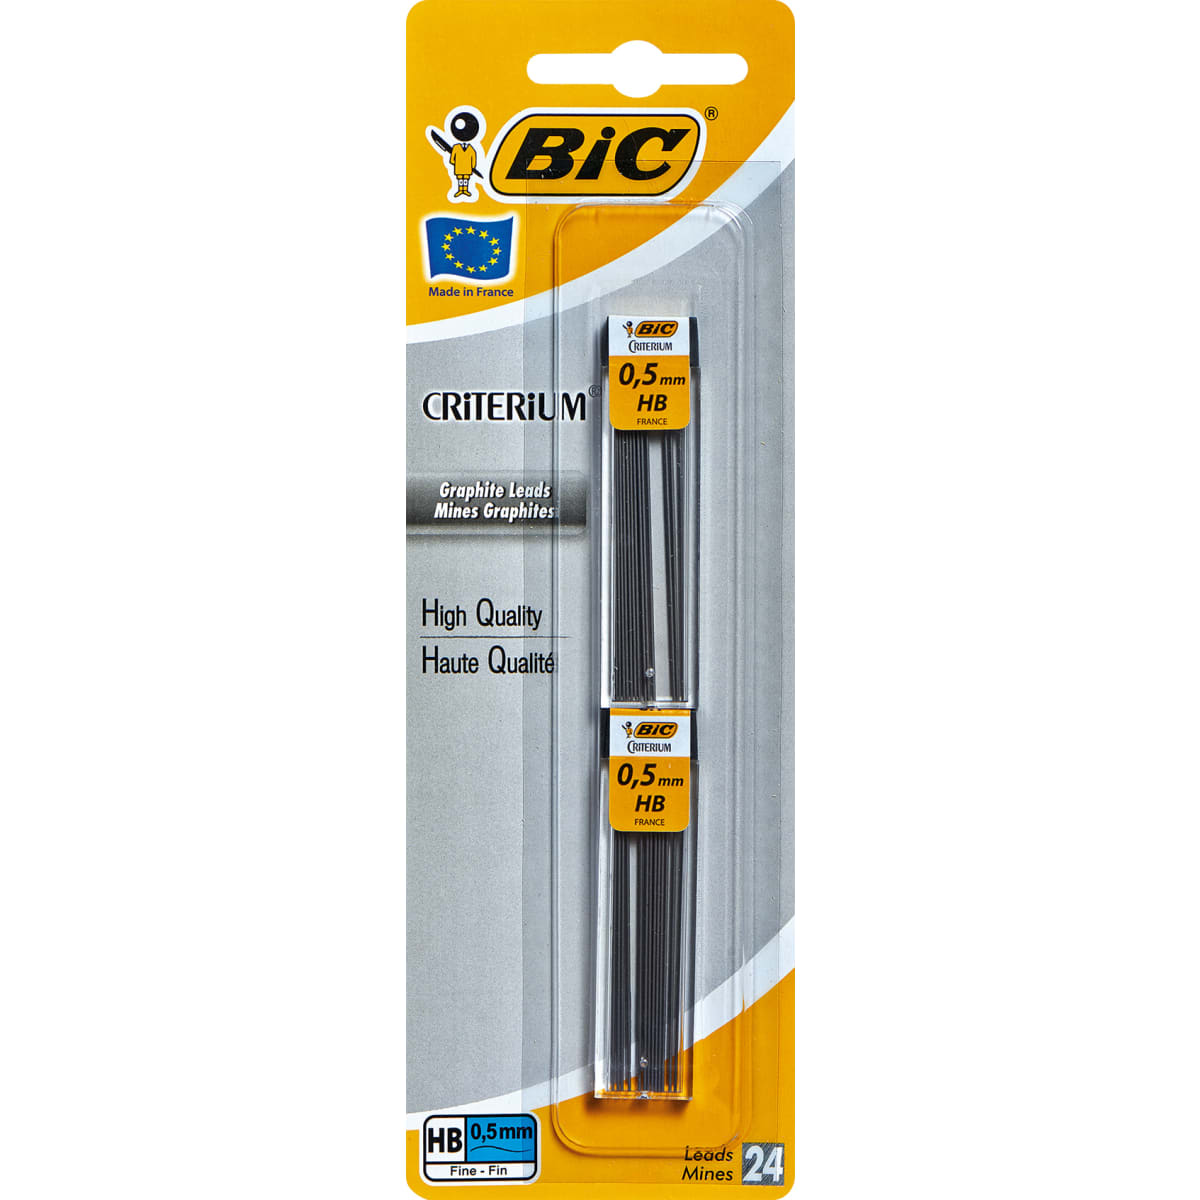 BIC Criterium Leads Refills 0 5mm for Mechanical Pencils Set of 2 RRP £3.90 CLEARANCE XL £2.99